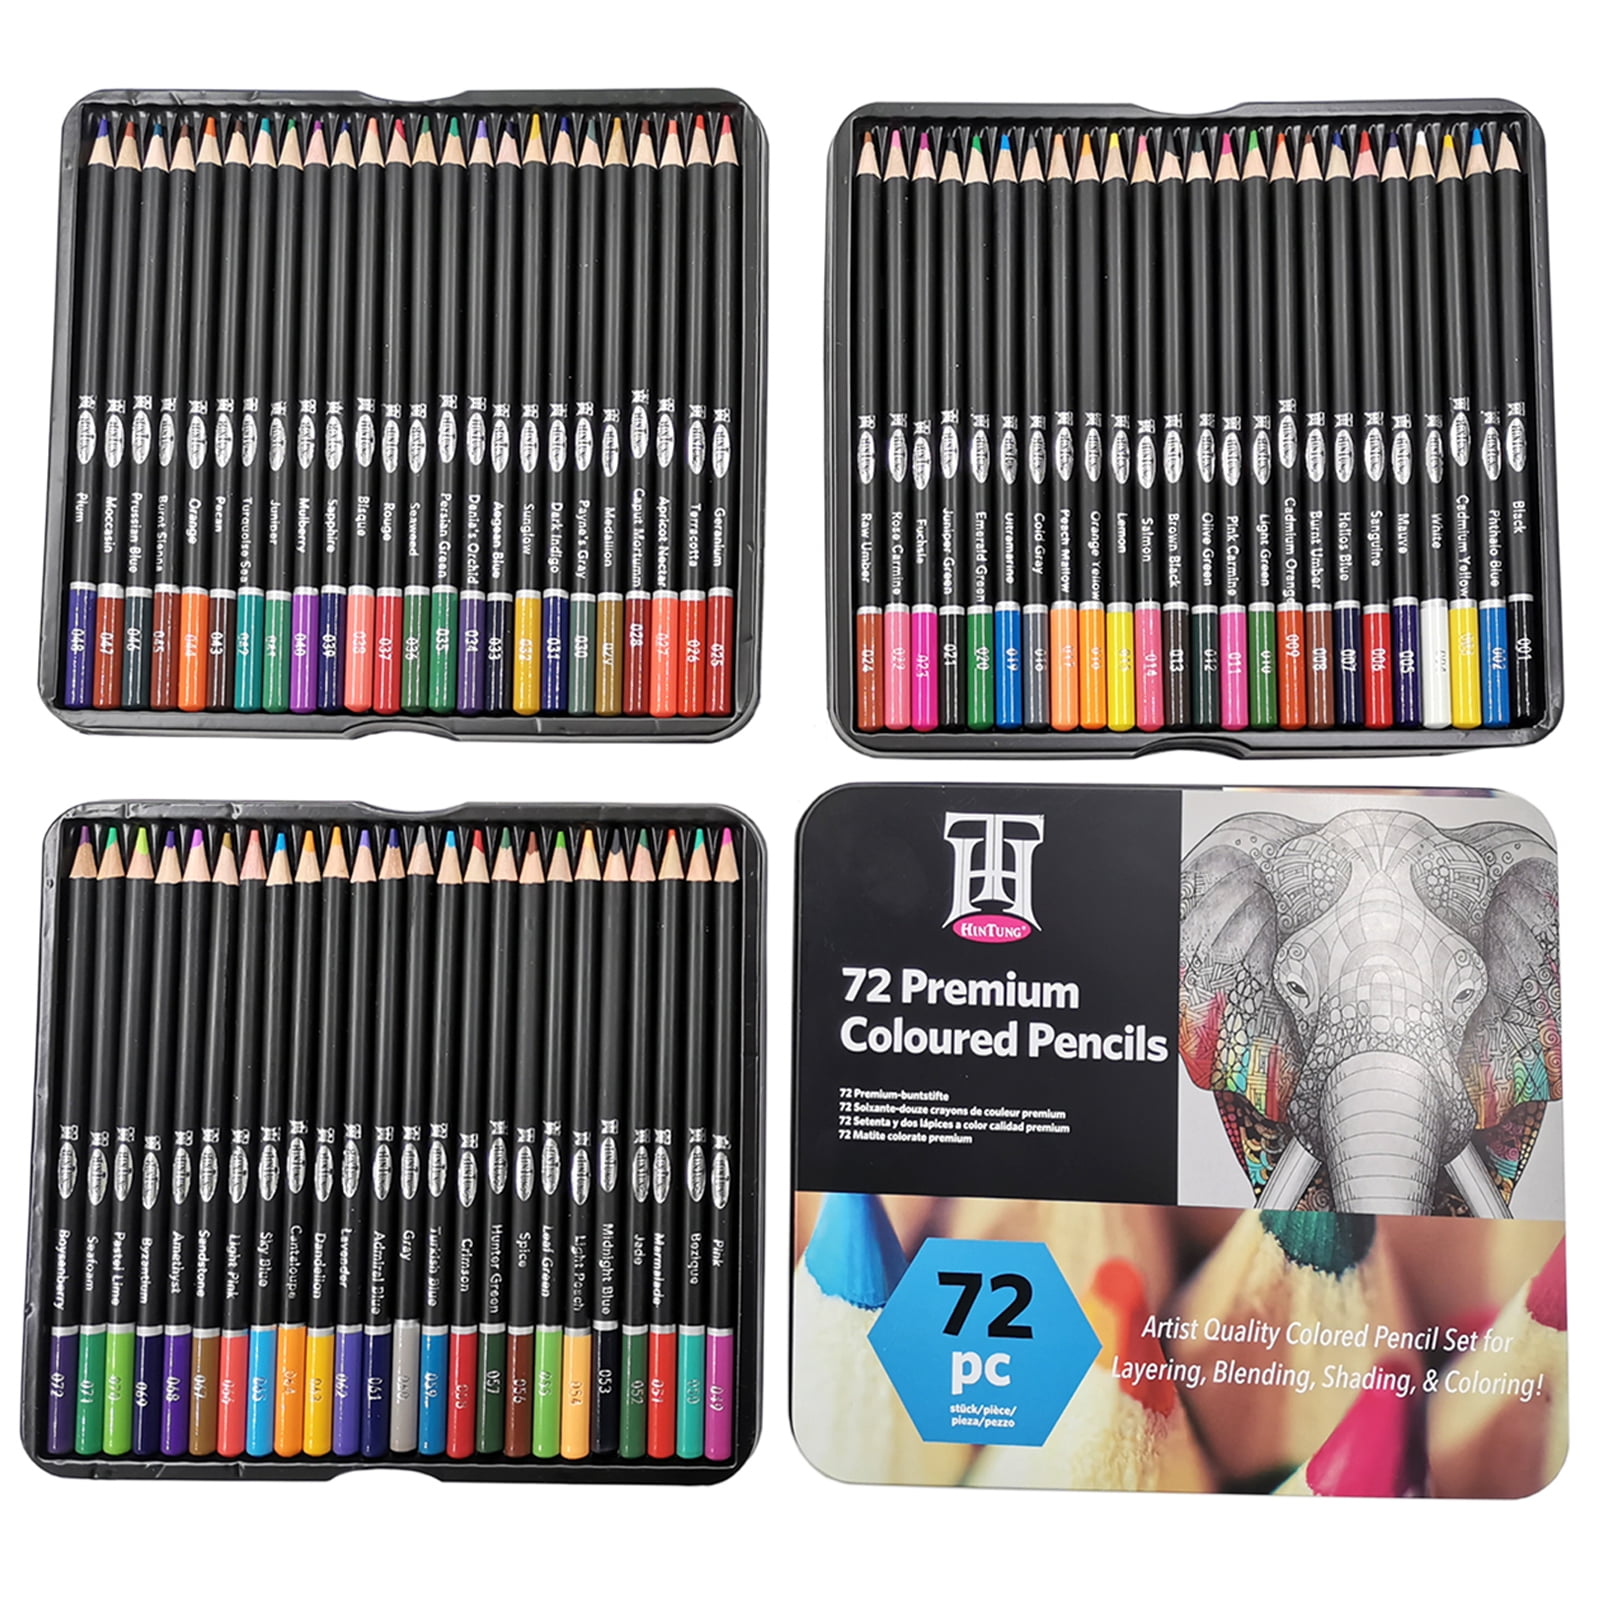 Soucolor 72-color Colored Pencils, Soft Core, Art Coloring Drawing Pencils  for Adult Coloring Book, Sketch,Crafting Projects 